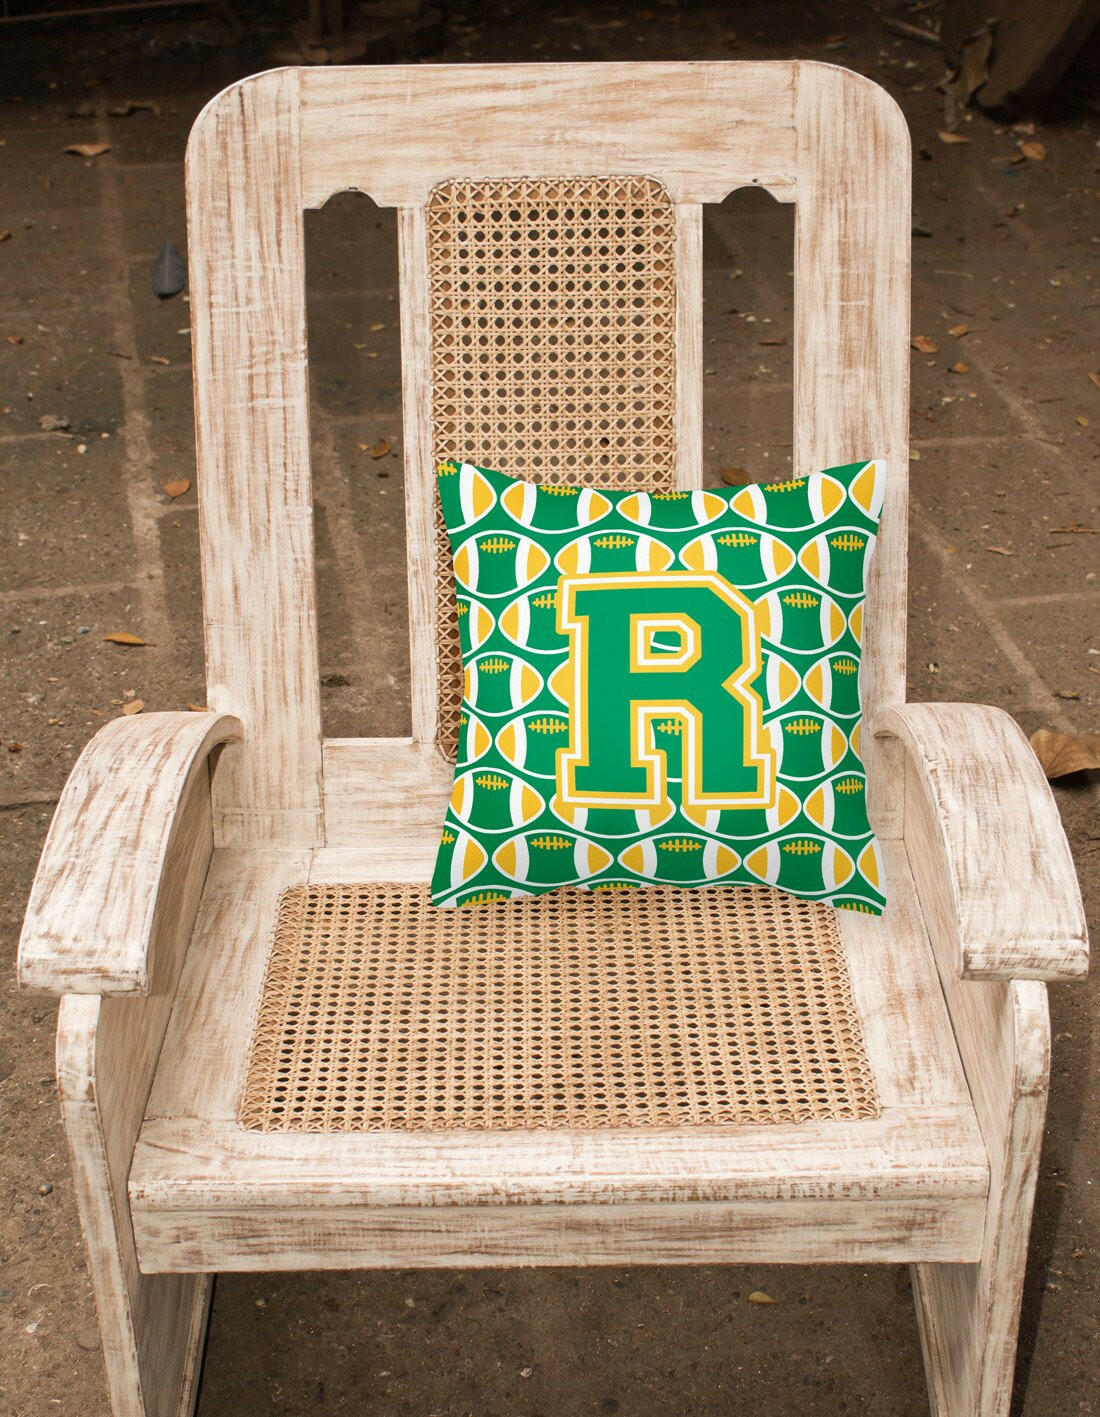 Letter R Football Green and Gold Fabric Decorative Pillow CJ1069-RPW1414 by Caroline's Treasures